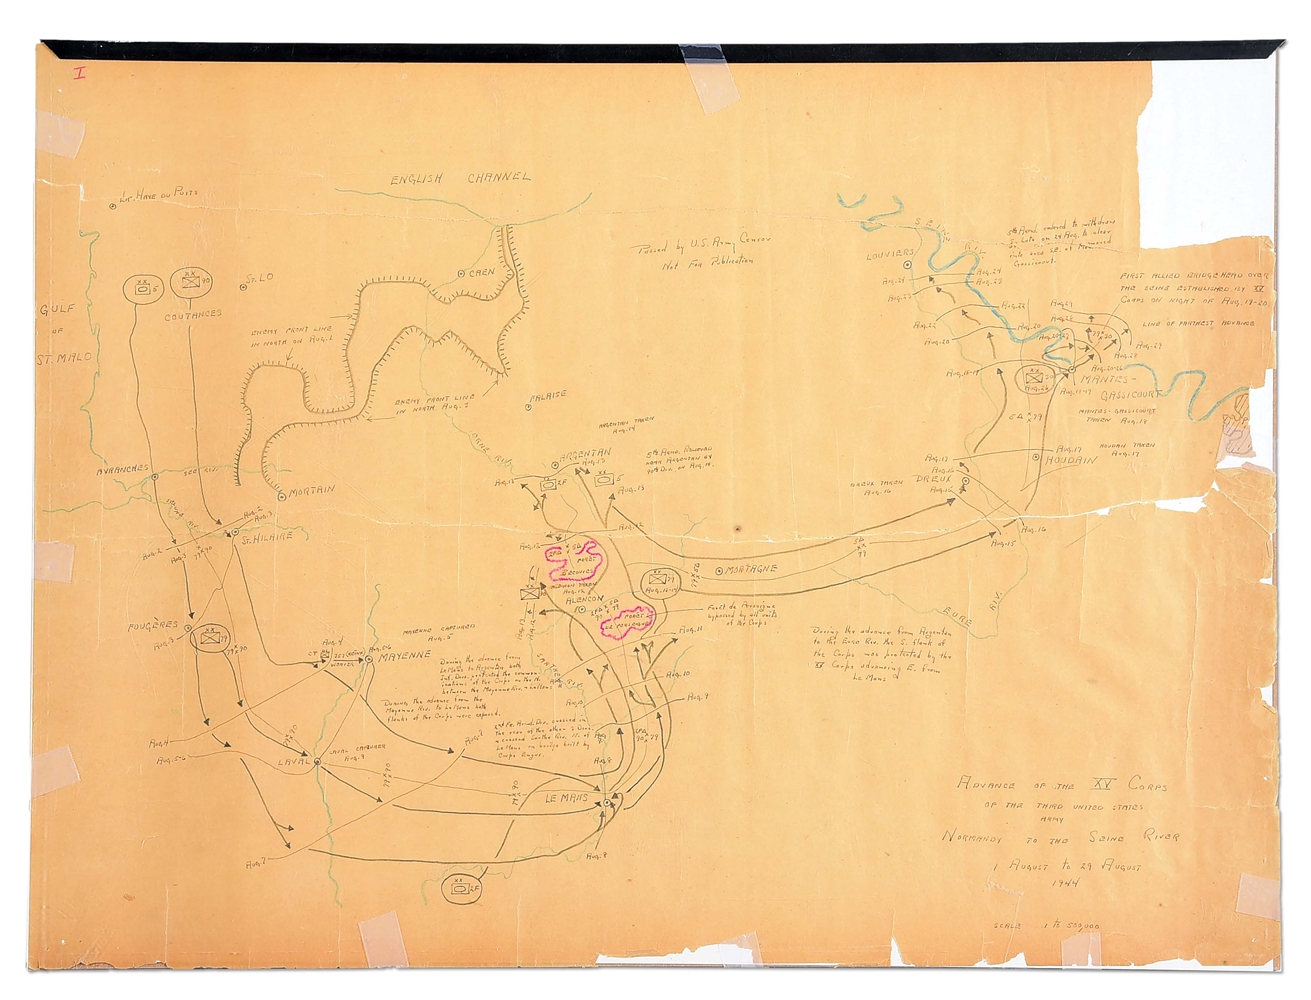 US WWII HAND DRAWN NORMANDY CAMPAIGN MAP DEPICTING THE ADVANCE OF XV CORPS, 1944.